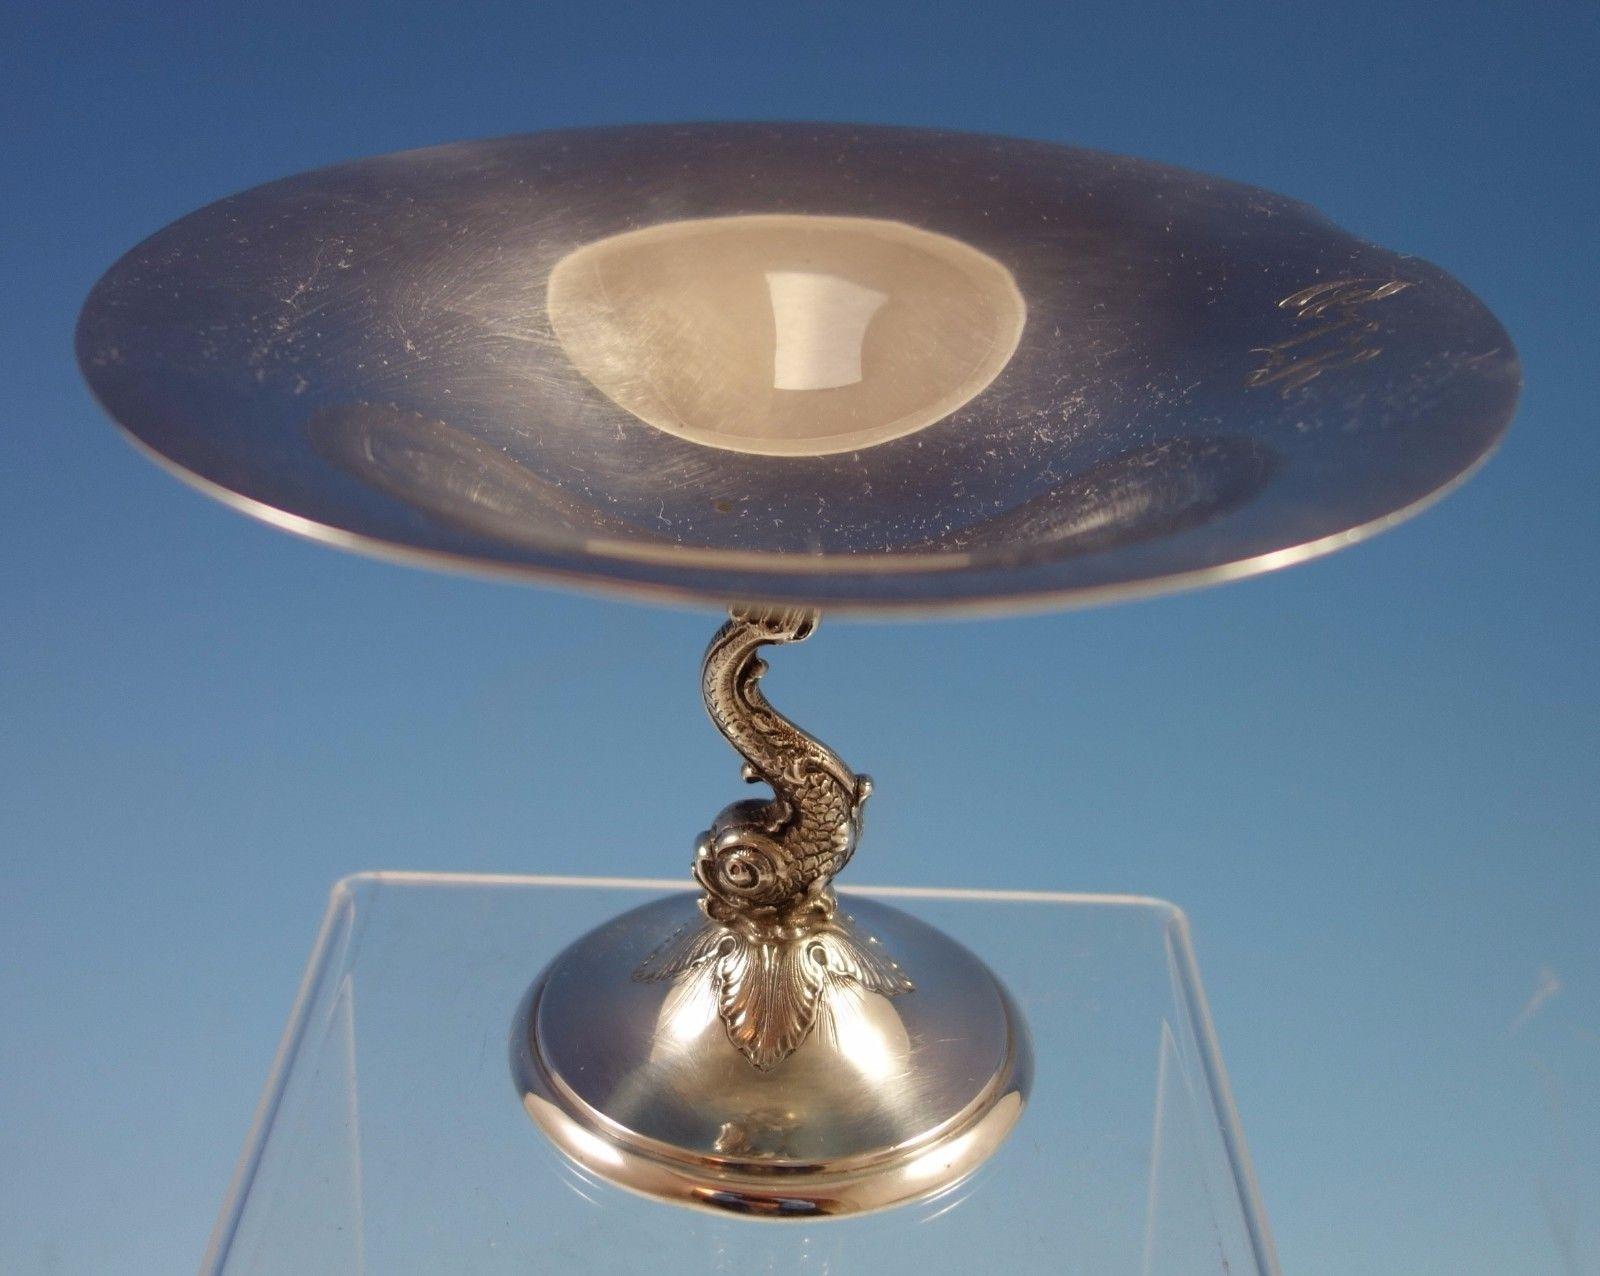 Redlich Redlich sterling silver compote with a 3-D fish base. The piece is marked with #8847, measures 4 3/8 tall and 6 diameter, and weighs 7.04 ozt. The vintage monogram (see photos), can be removed upon request. It is in excellent condition.